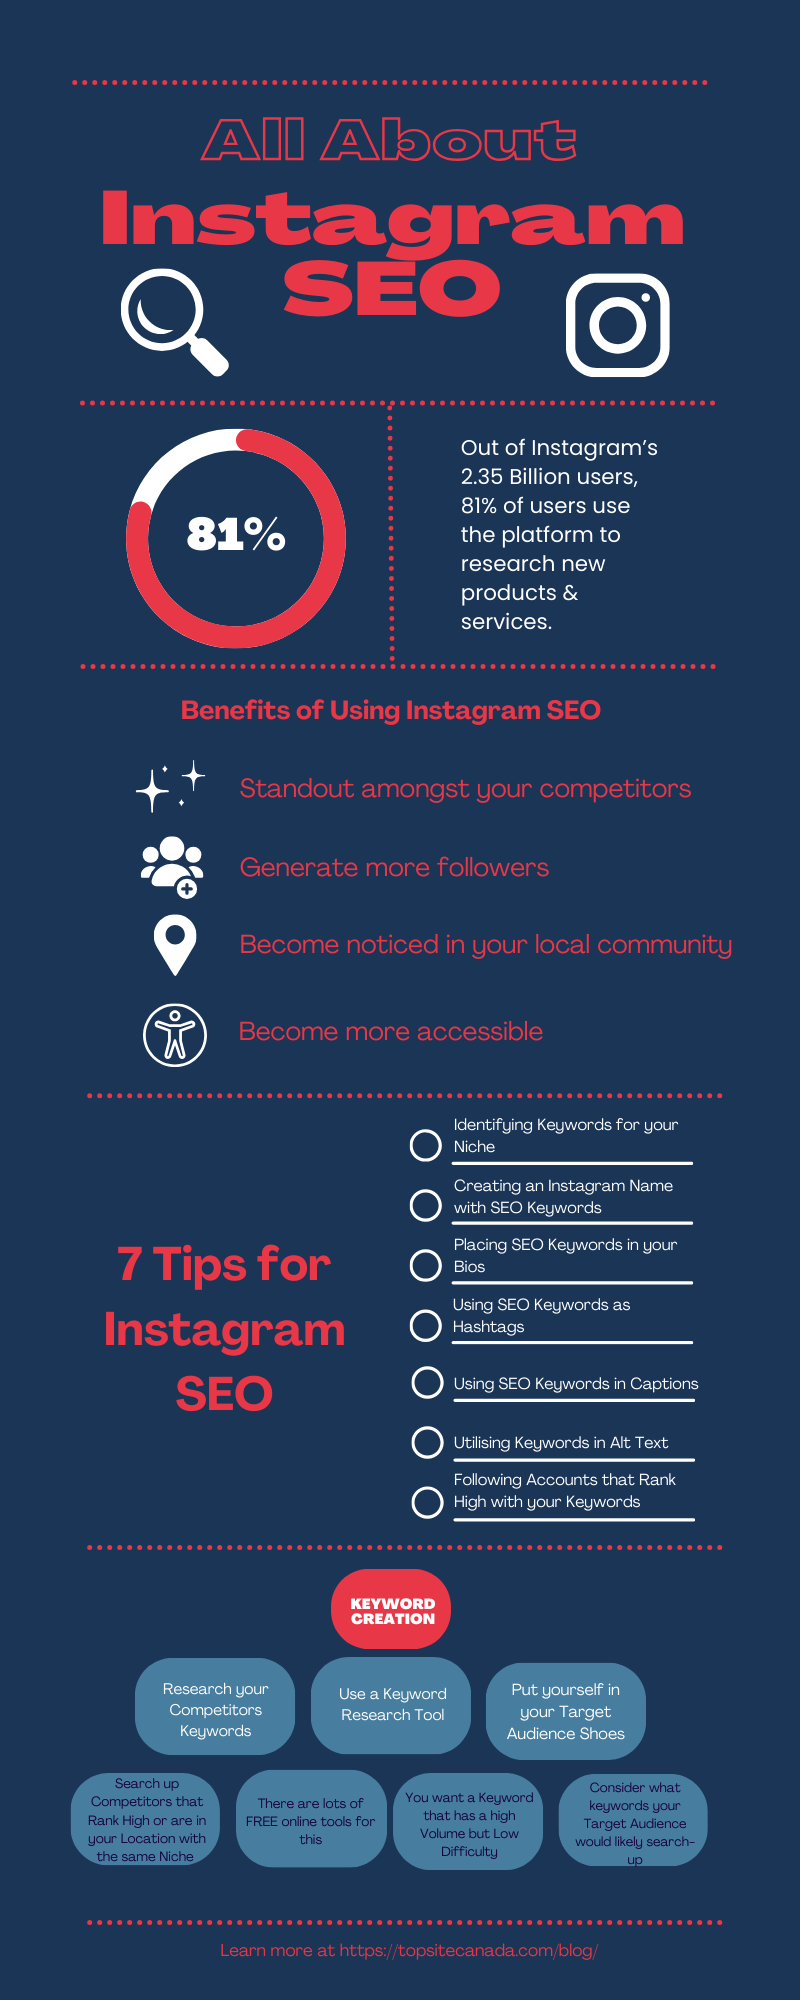  This infographic is titled “All About SEO.” It sums up the content of this article, listing the 7 tips for Instagram SEO. 